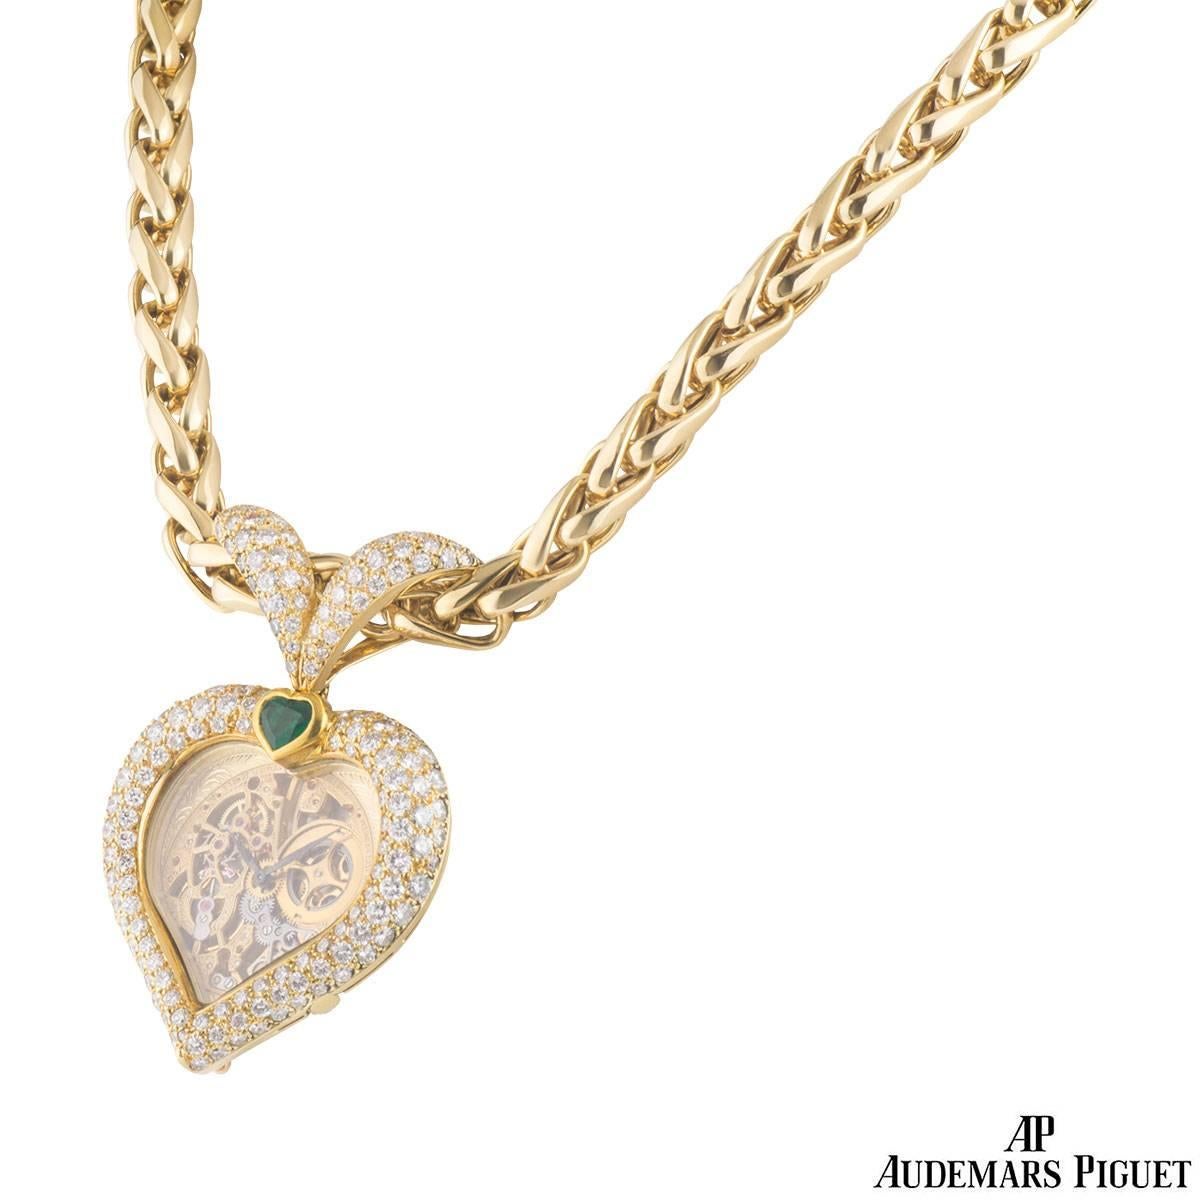 A unique 18k yellow gold diamond and emerald Audemars Piguet pocket watch necklace. The watch comprises of a heart motif with a sapphire glass panel centre. The centre features a skeleton dial and an exhibition caseback. The motif is encrusted in